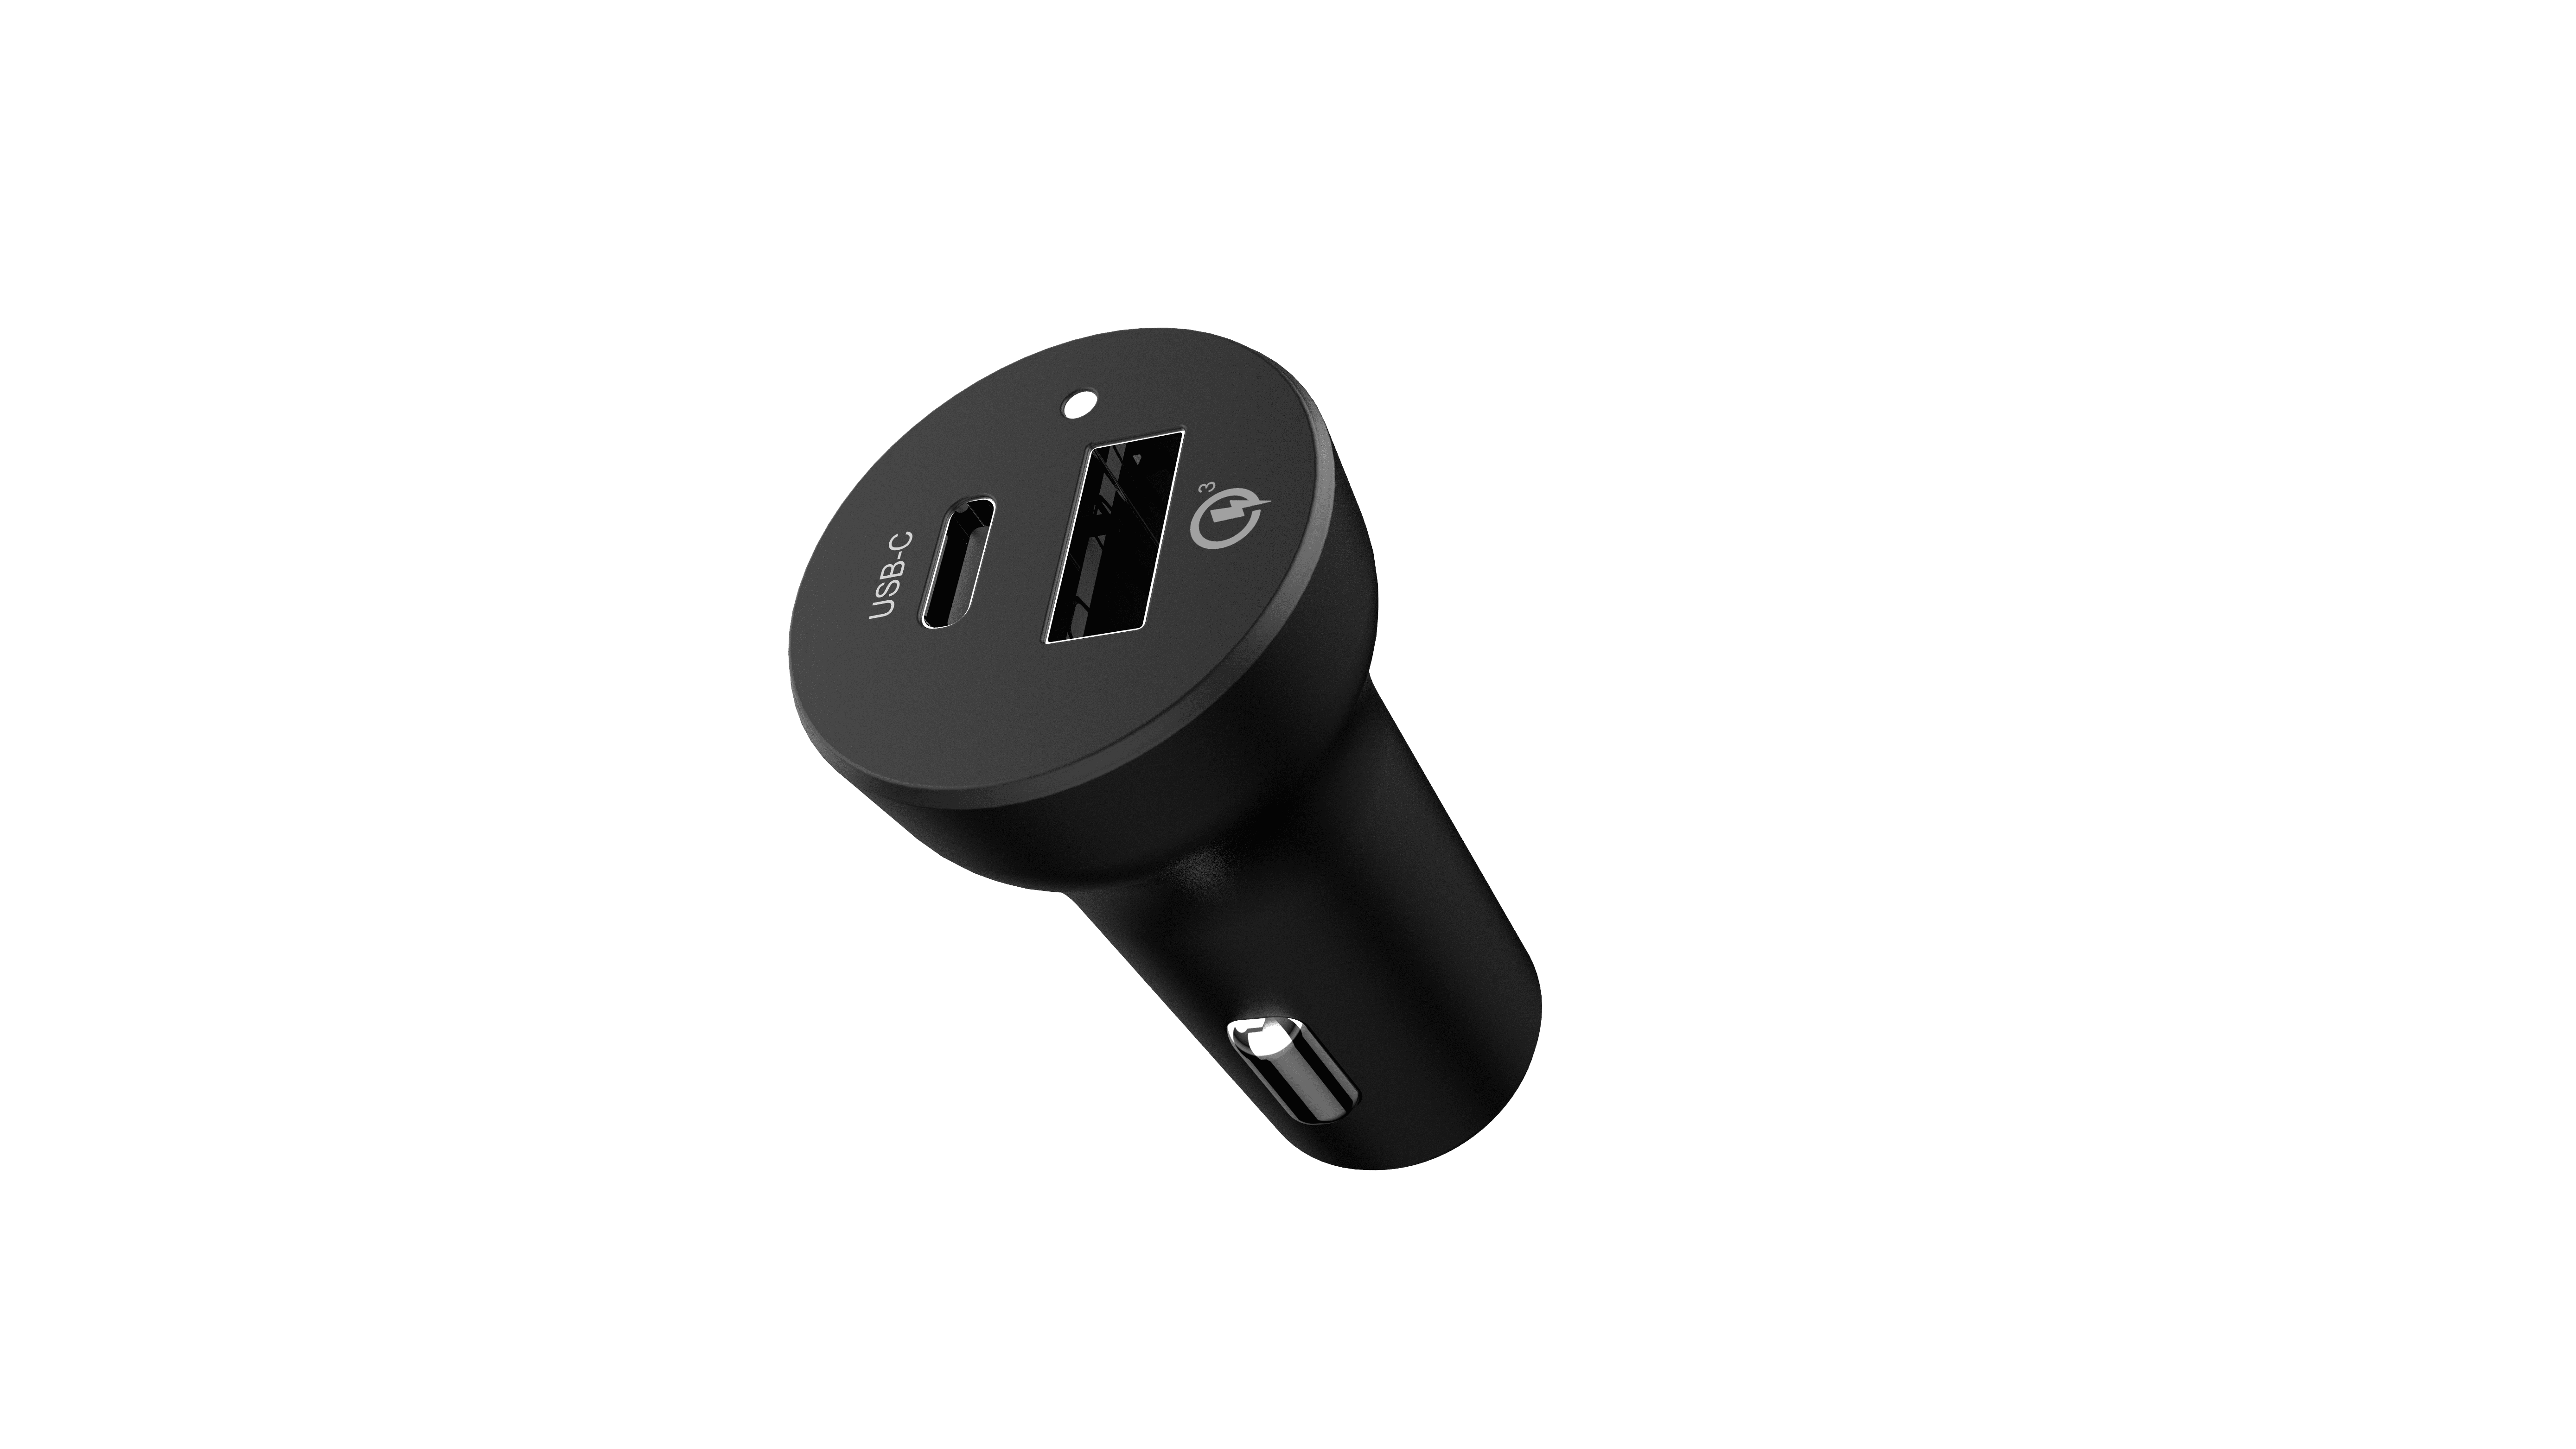 Auto Drive Quick Charge  USB Car Charger, Dual USB Type A and USB Type C  Charging Ports 